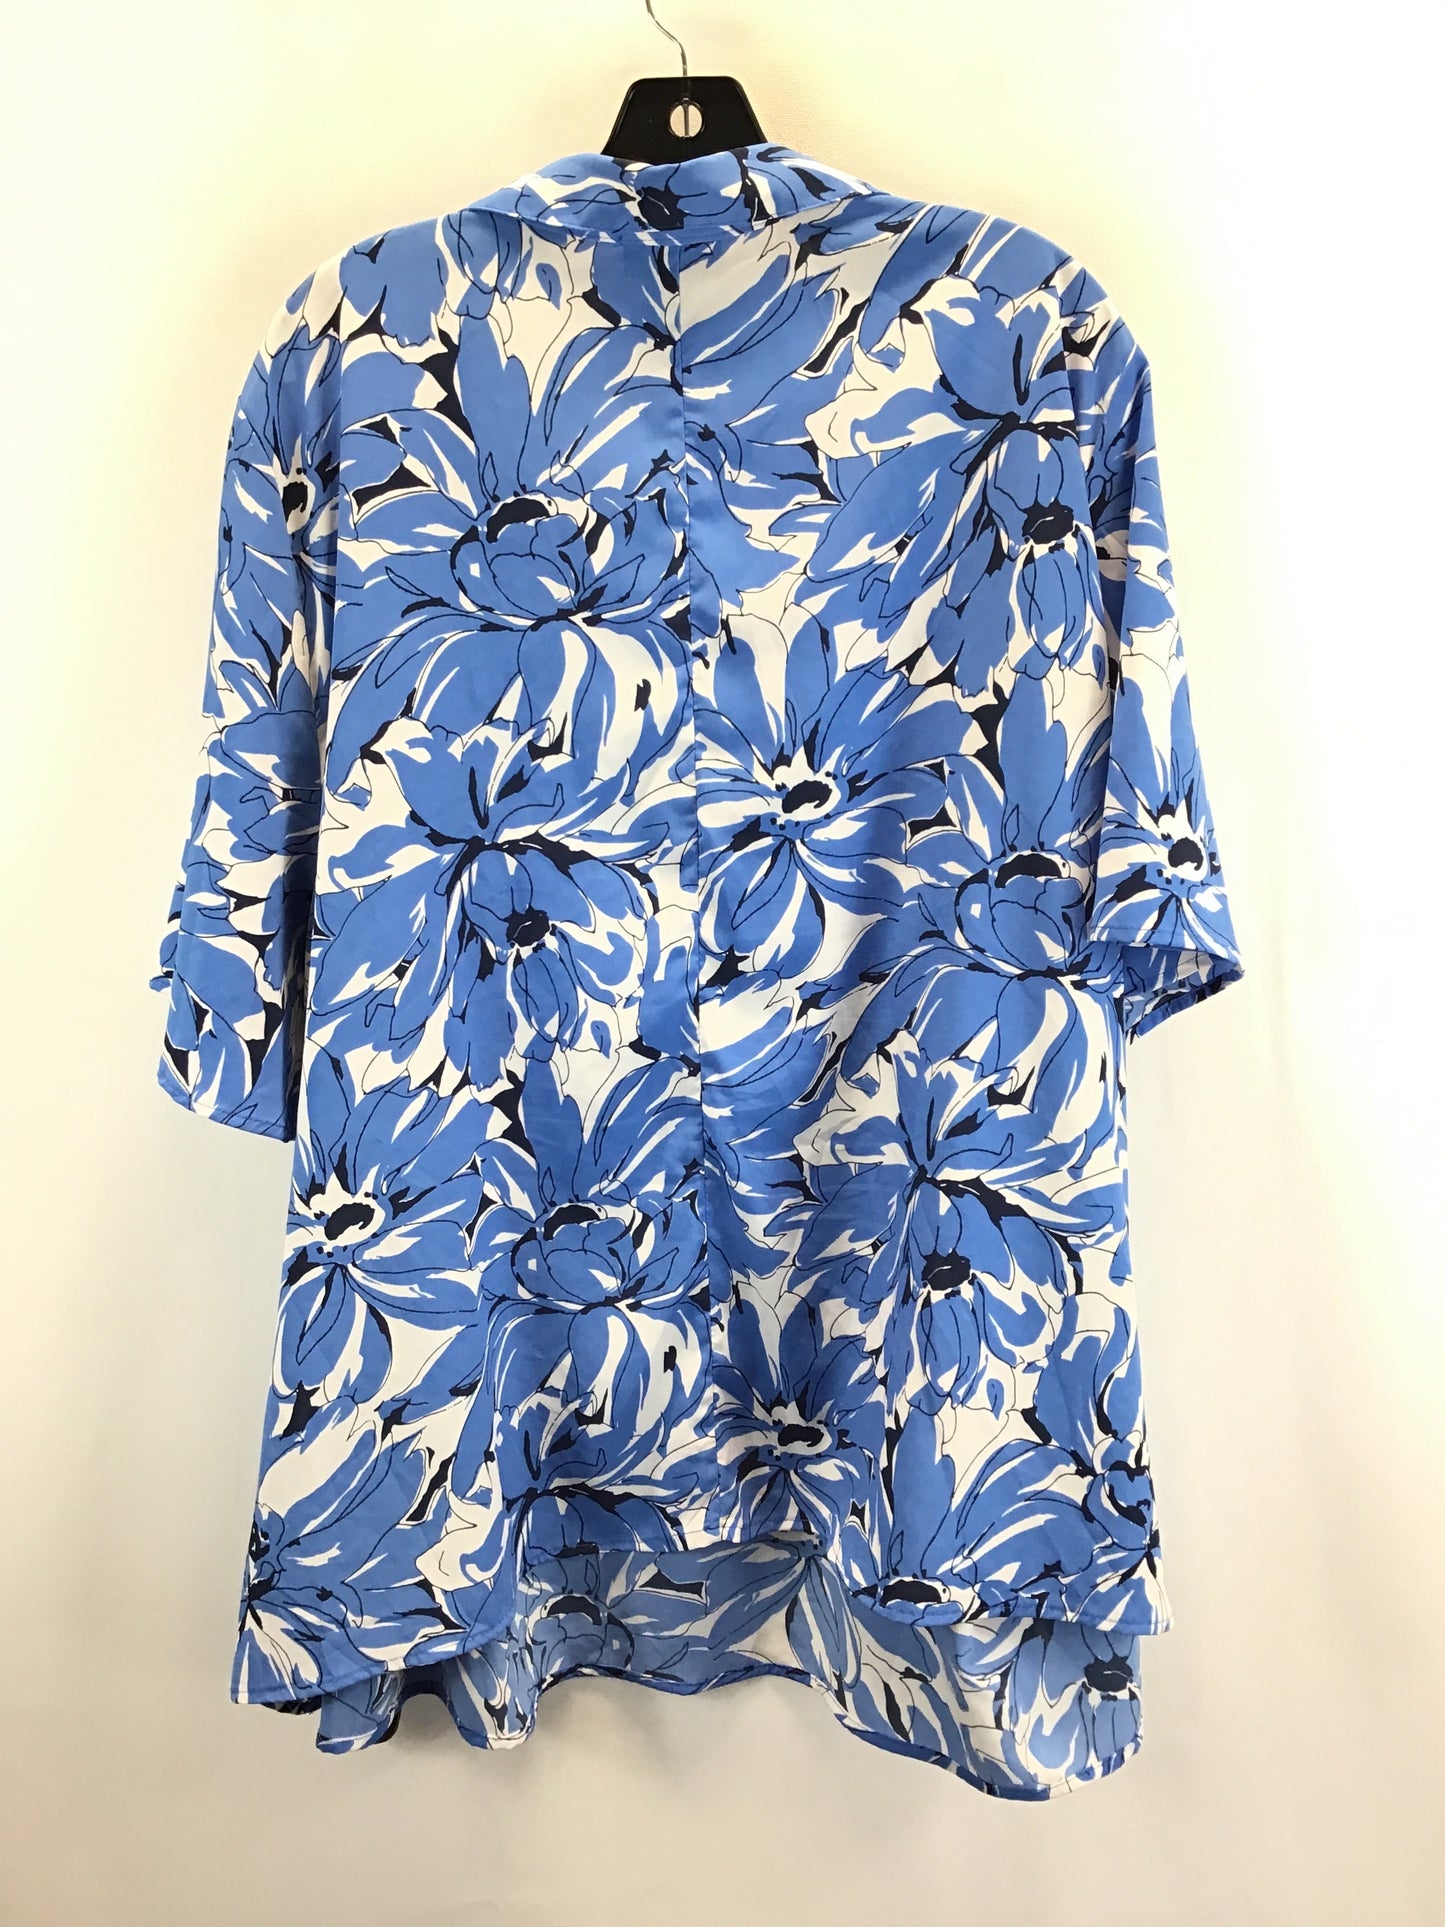 Floral Print Top Short Sleeve Catherines, Size 3x